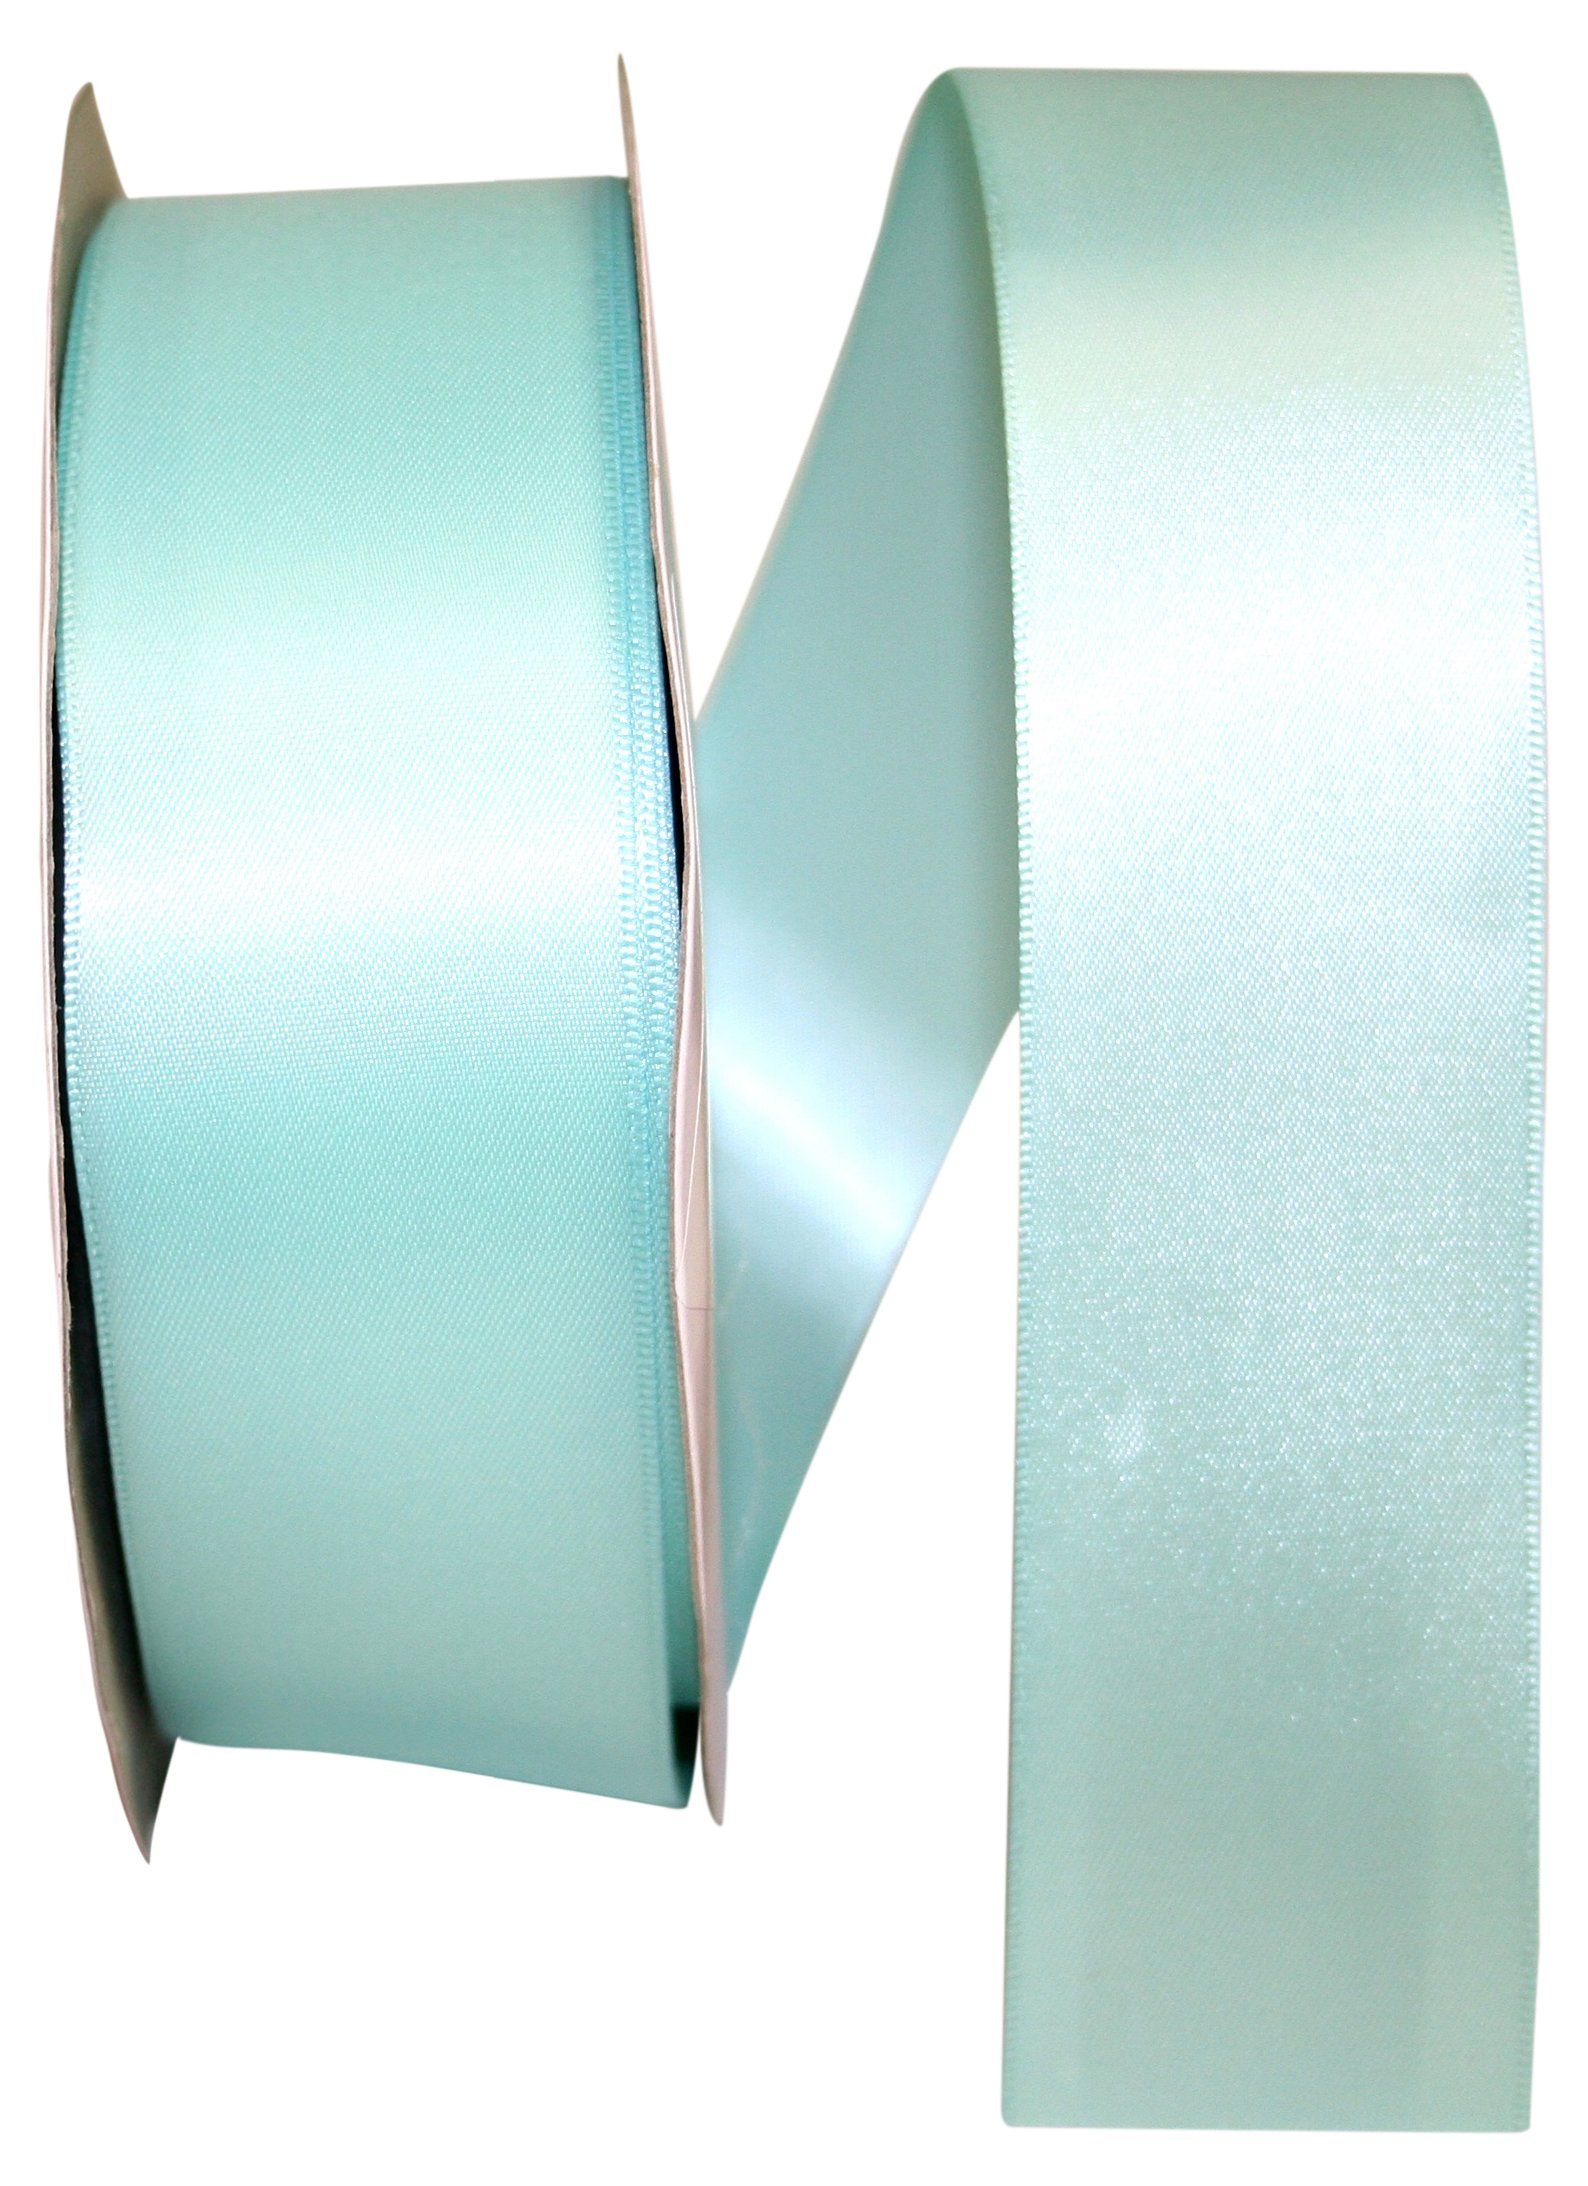 Special Order: #9 Double Face Satin Ribbon 1.5 x 50 yds - Lime Juice